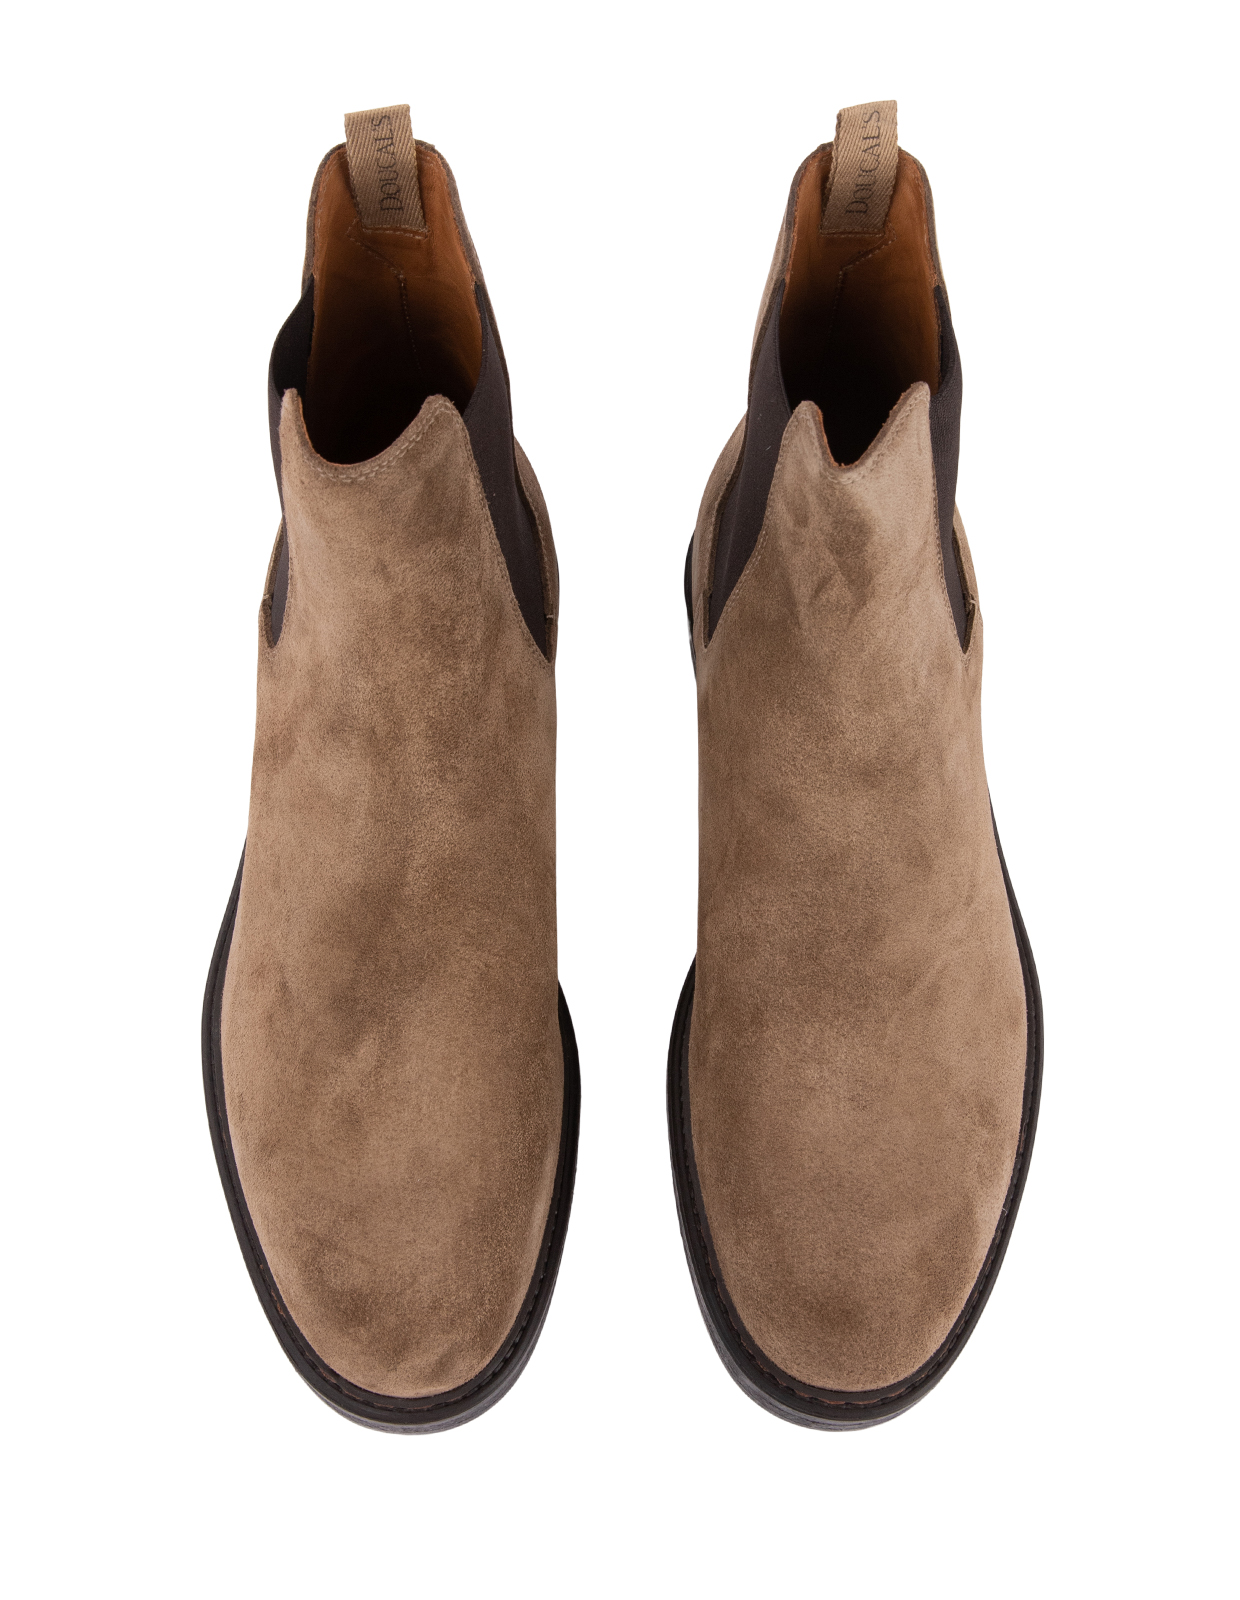 Chelsea Boots Tabacco Stl 43.5